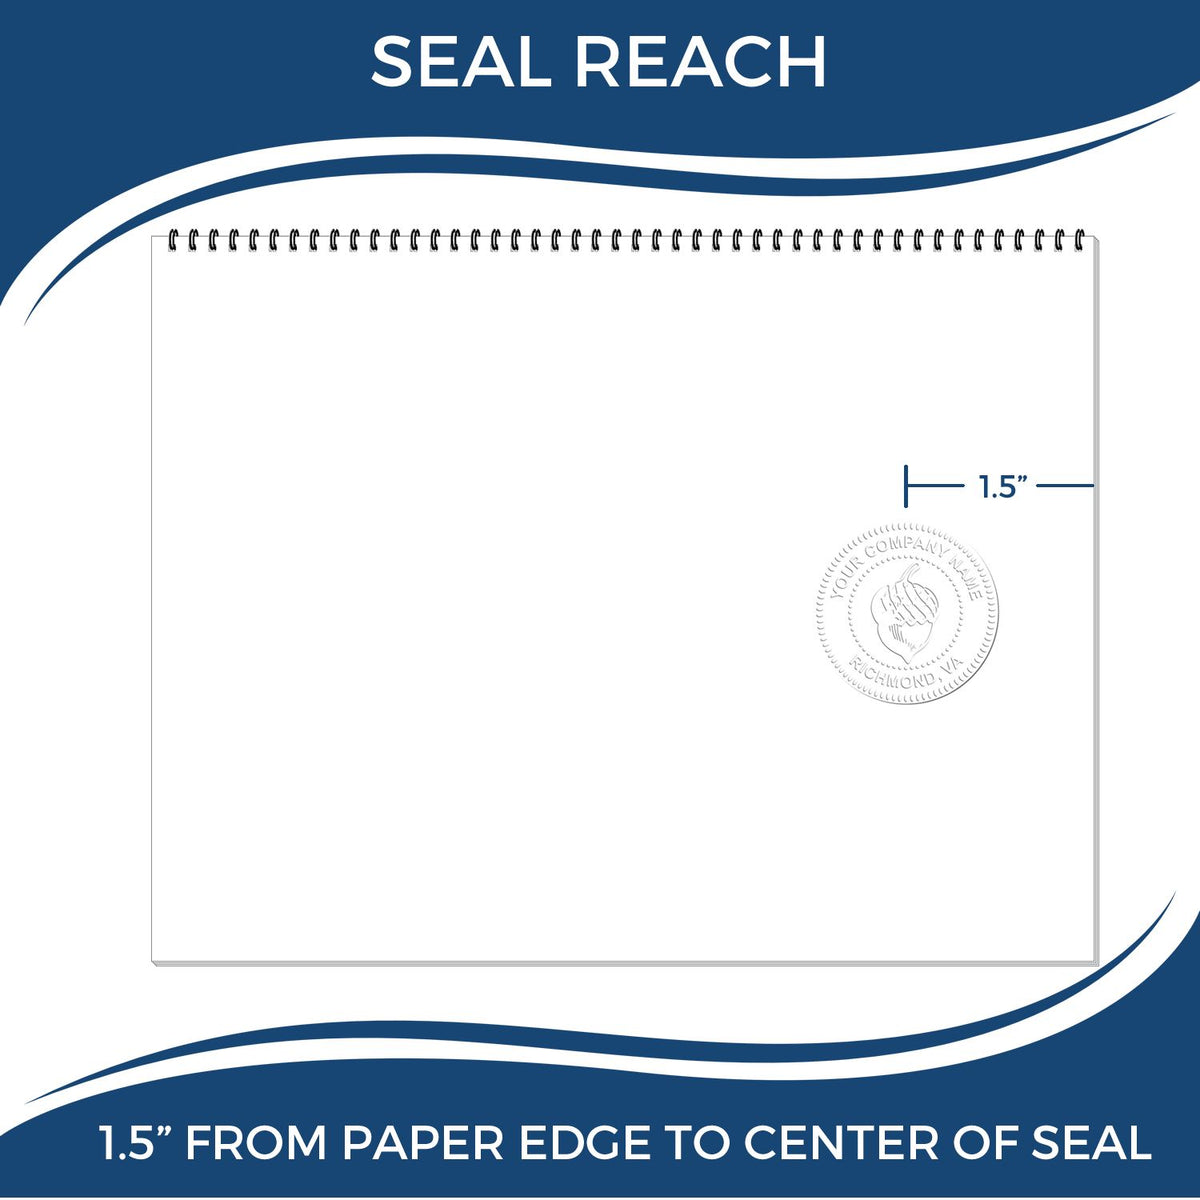 An infographic showing the seal reach which is represented by a ruler and a miniature seal image of the Hybrid New Jersey Landscape Architect Seal